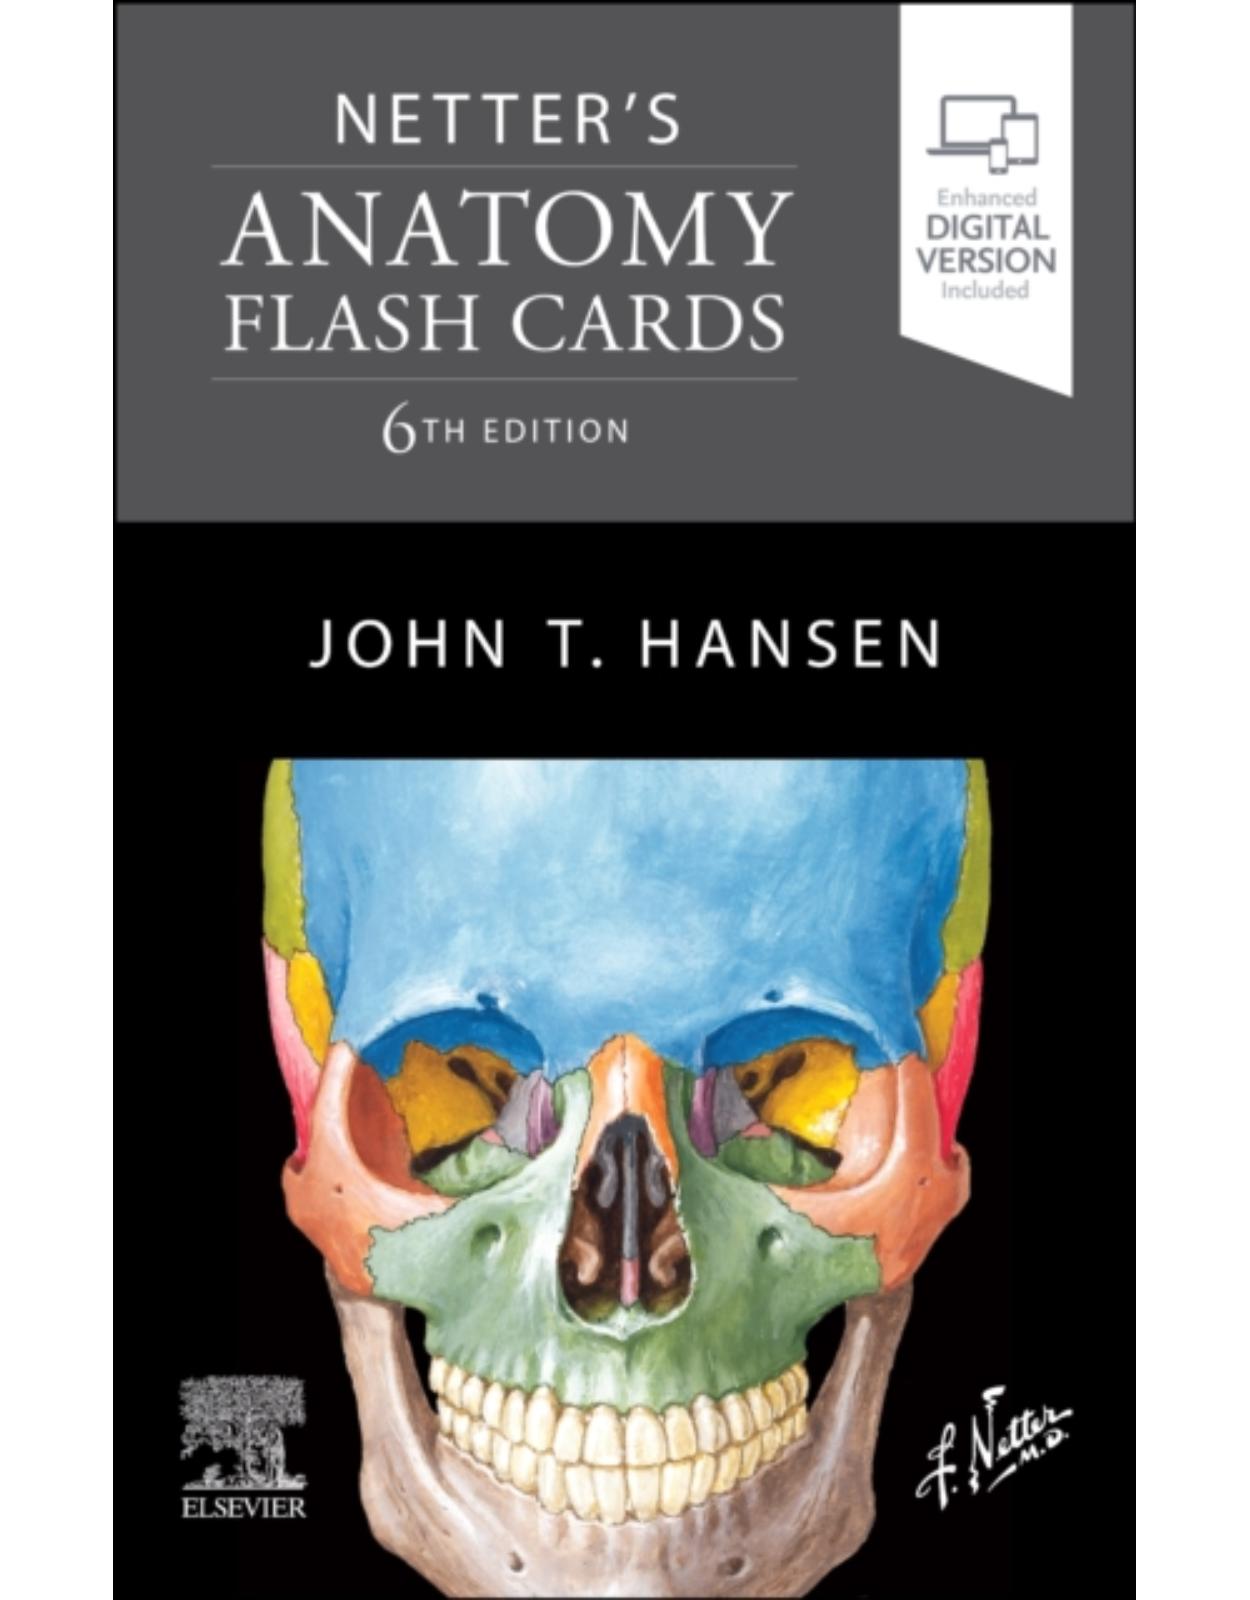 Netter’s Anatomy Flash Cards, 6th Edition